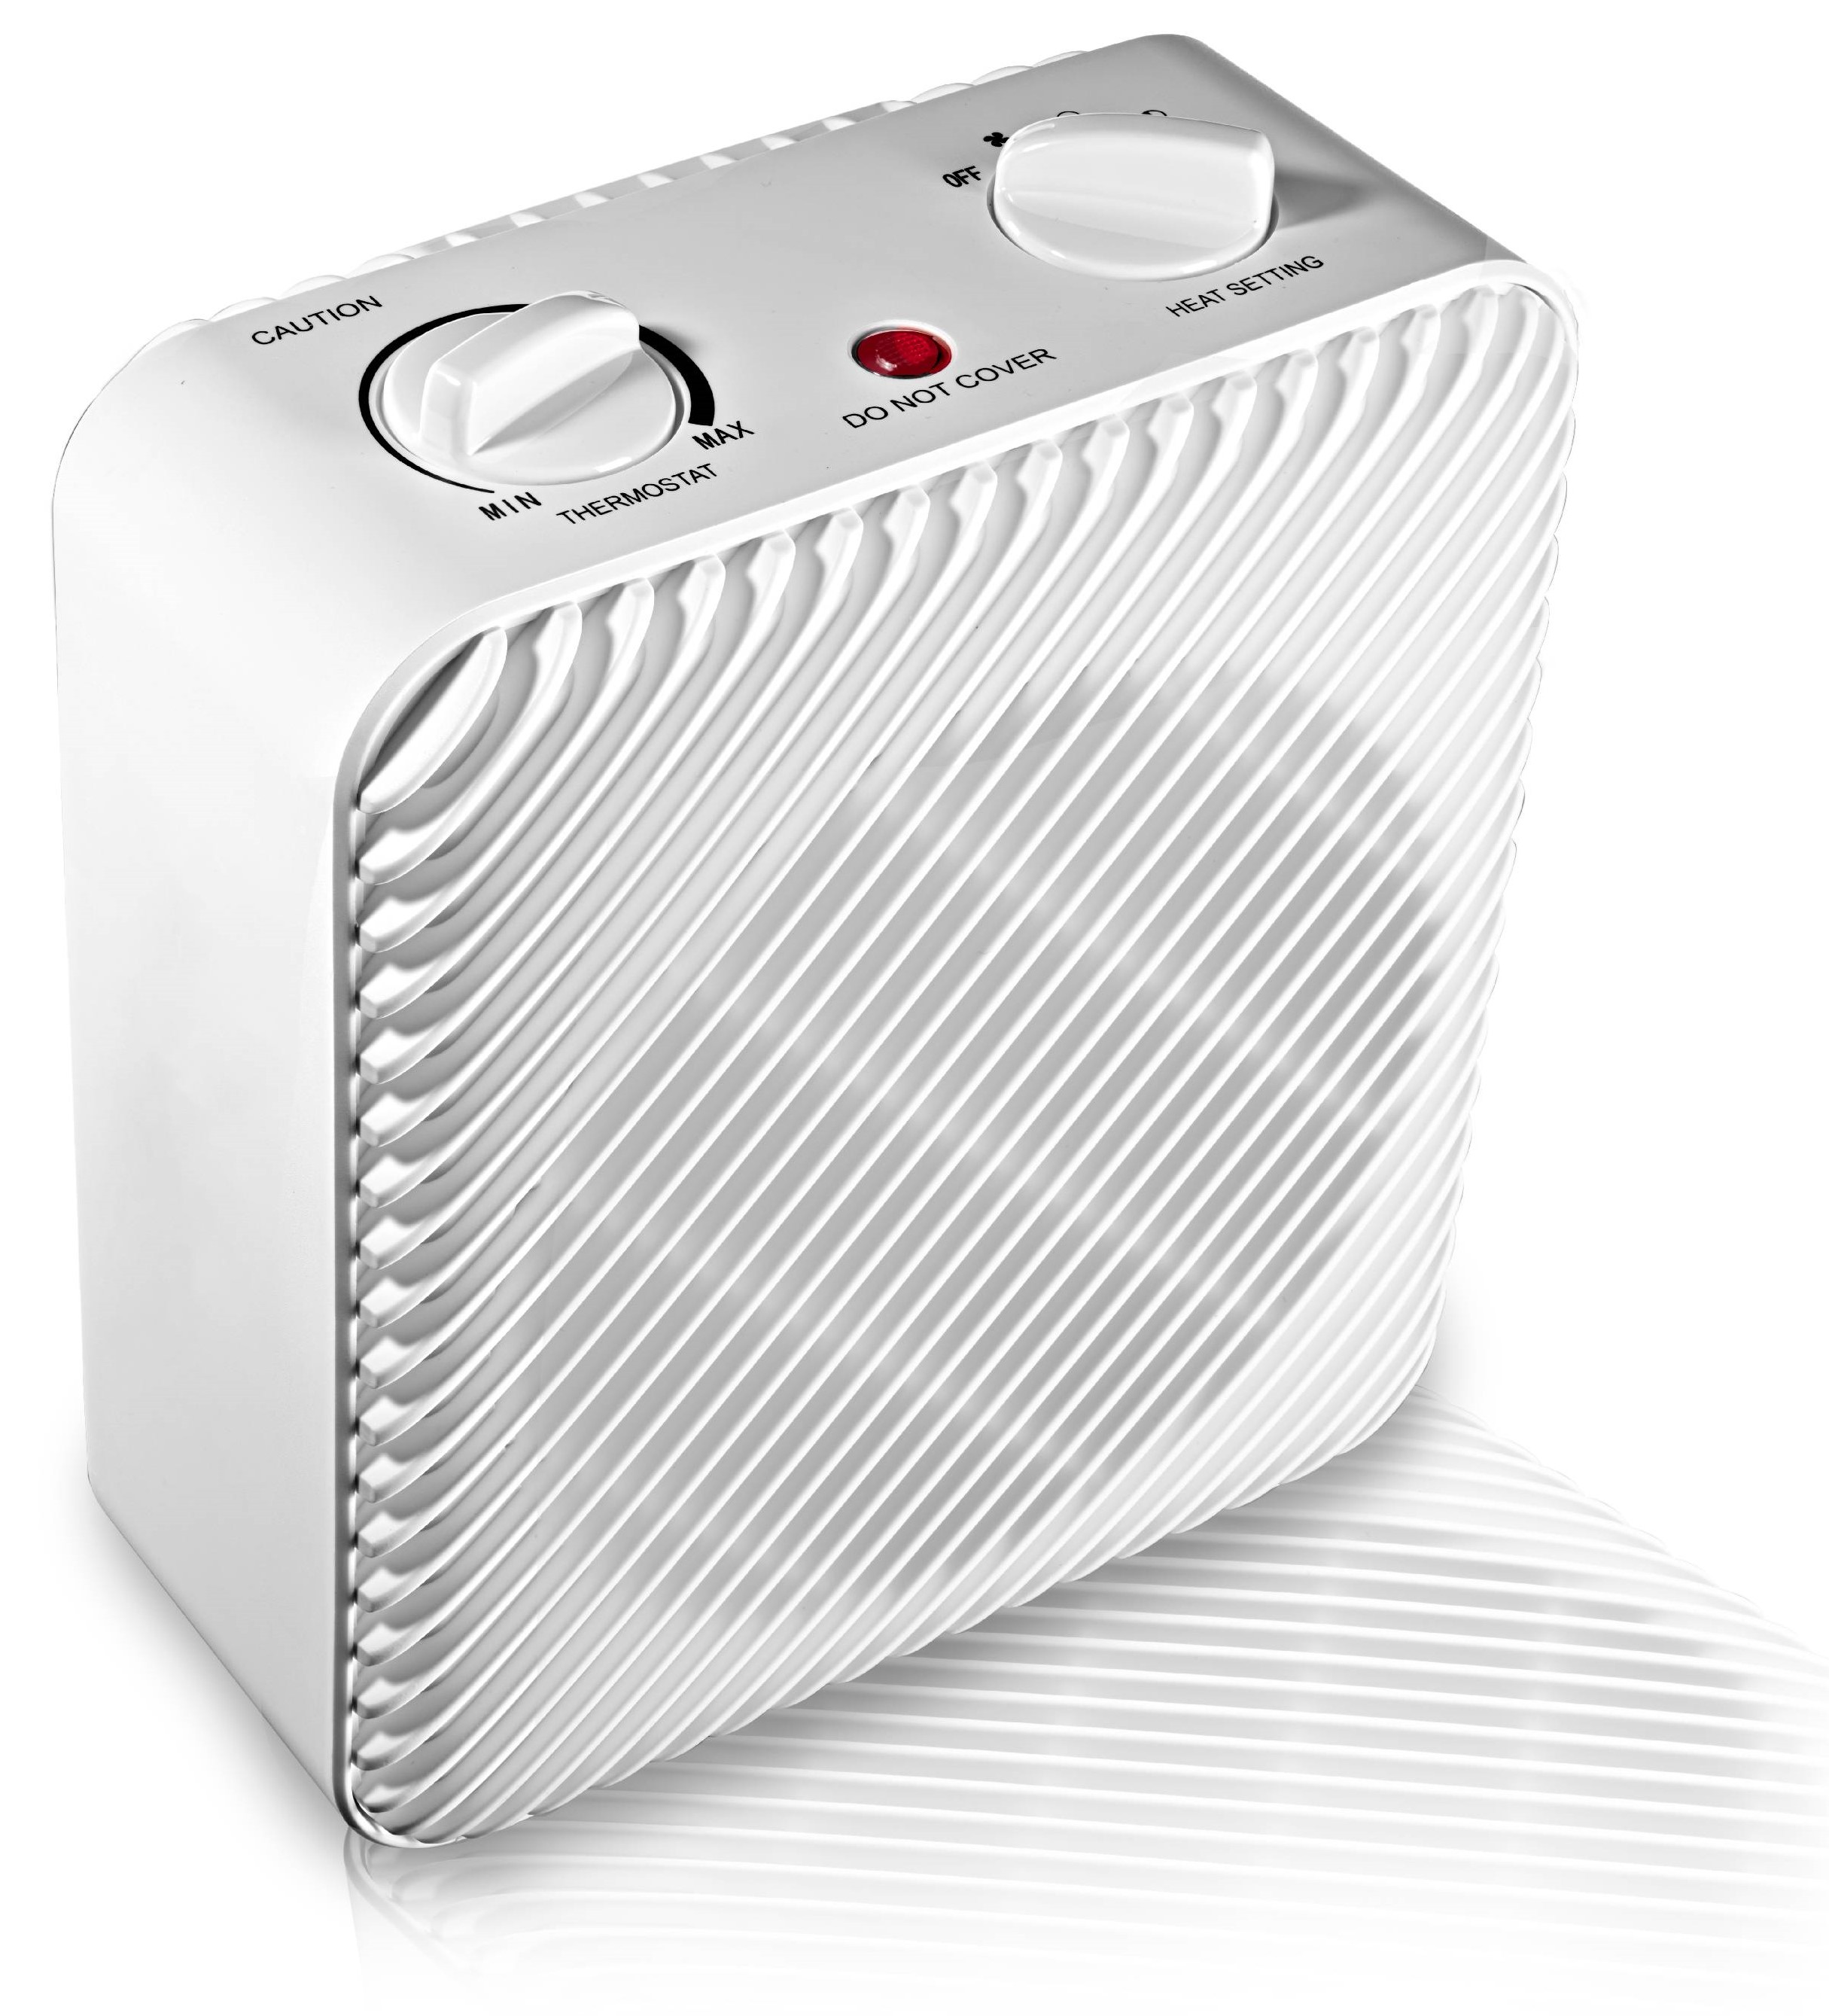 Mainstays 1500W 3-Speed Electric Fan-Forced Space Heater with Adjustable Thermostat, White - image 3 of 9